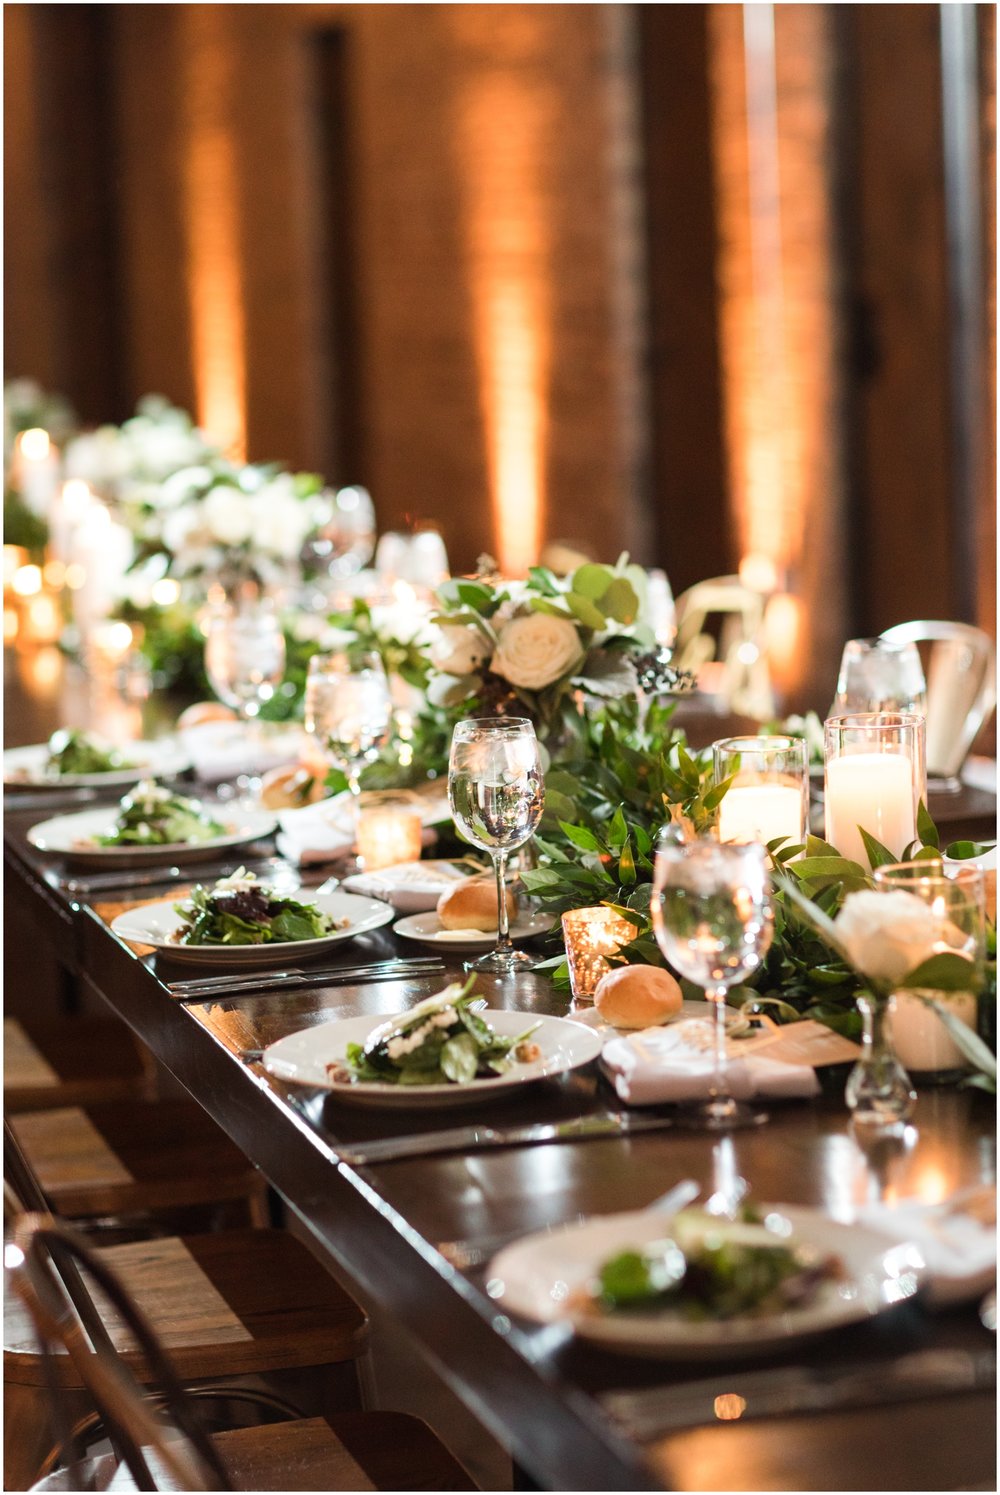  wedding catering food and tablescape 